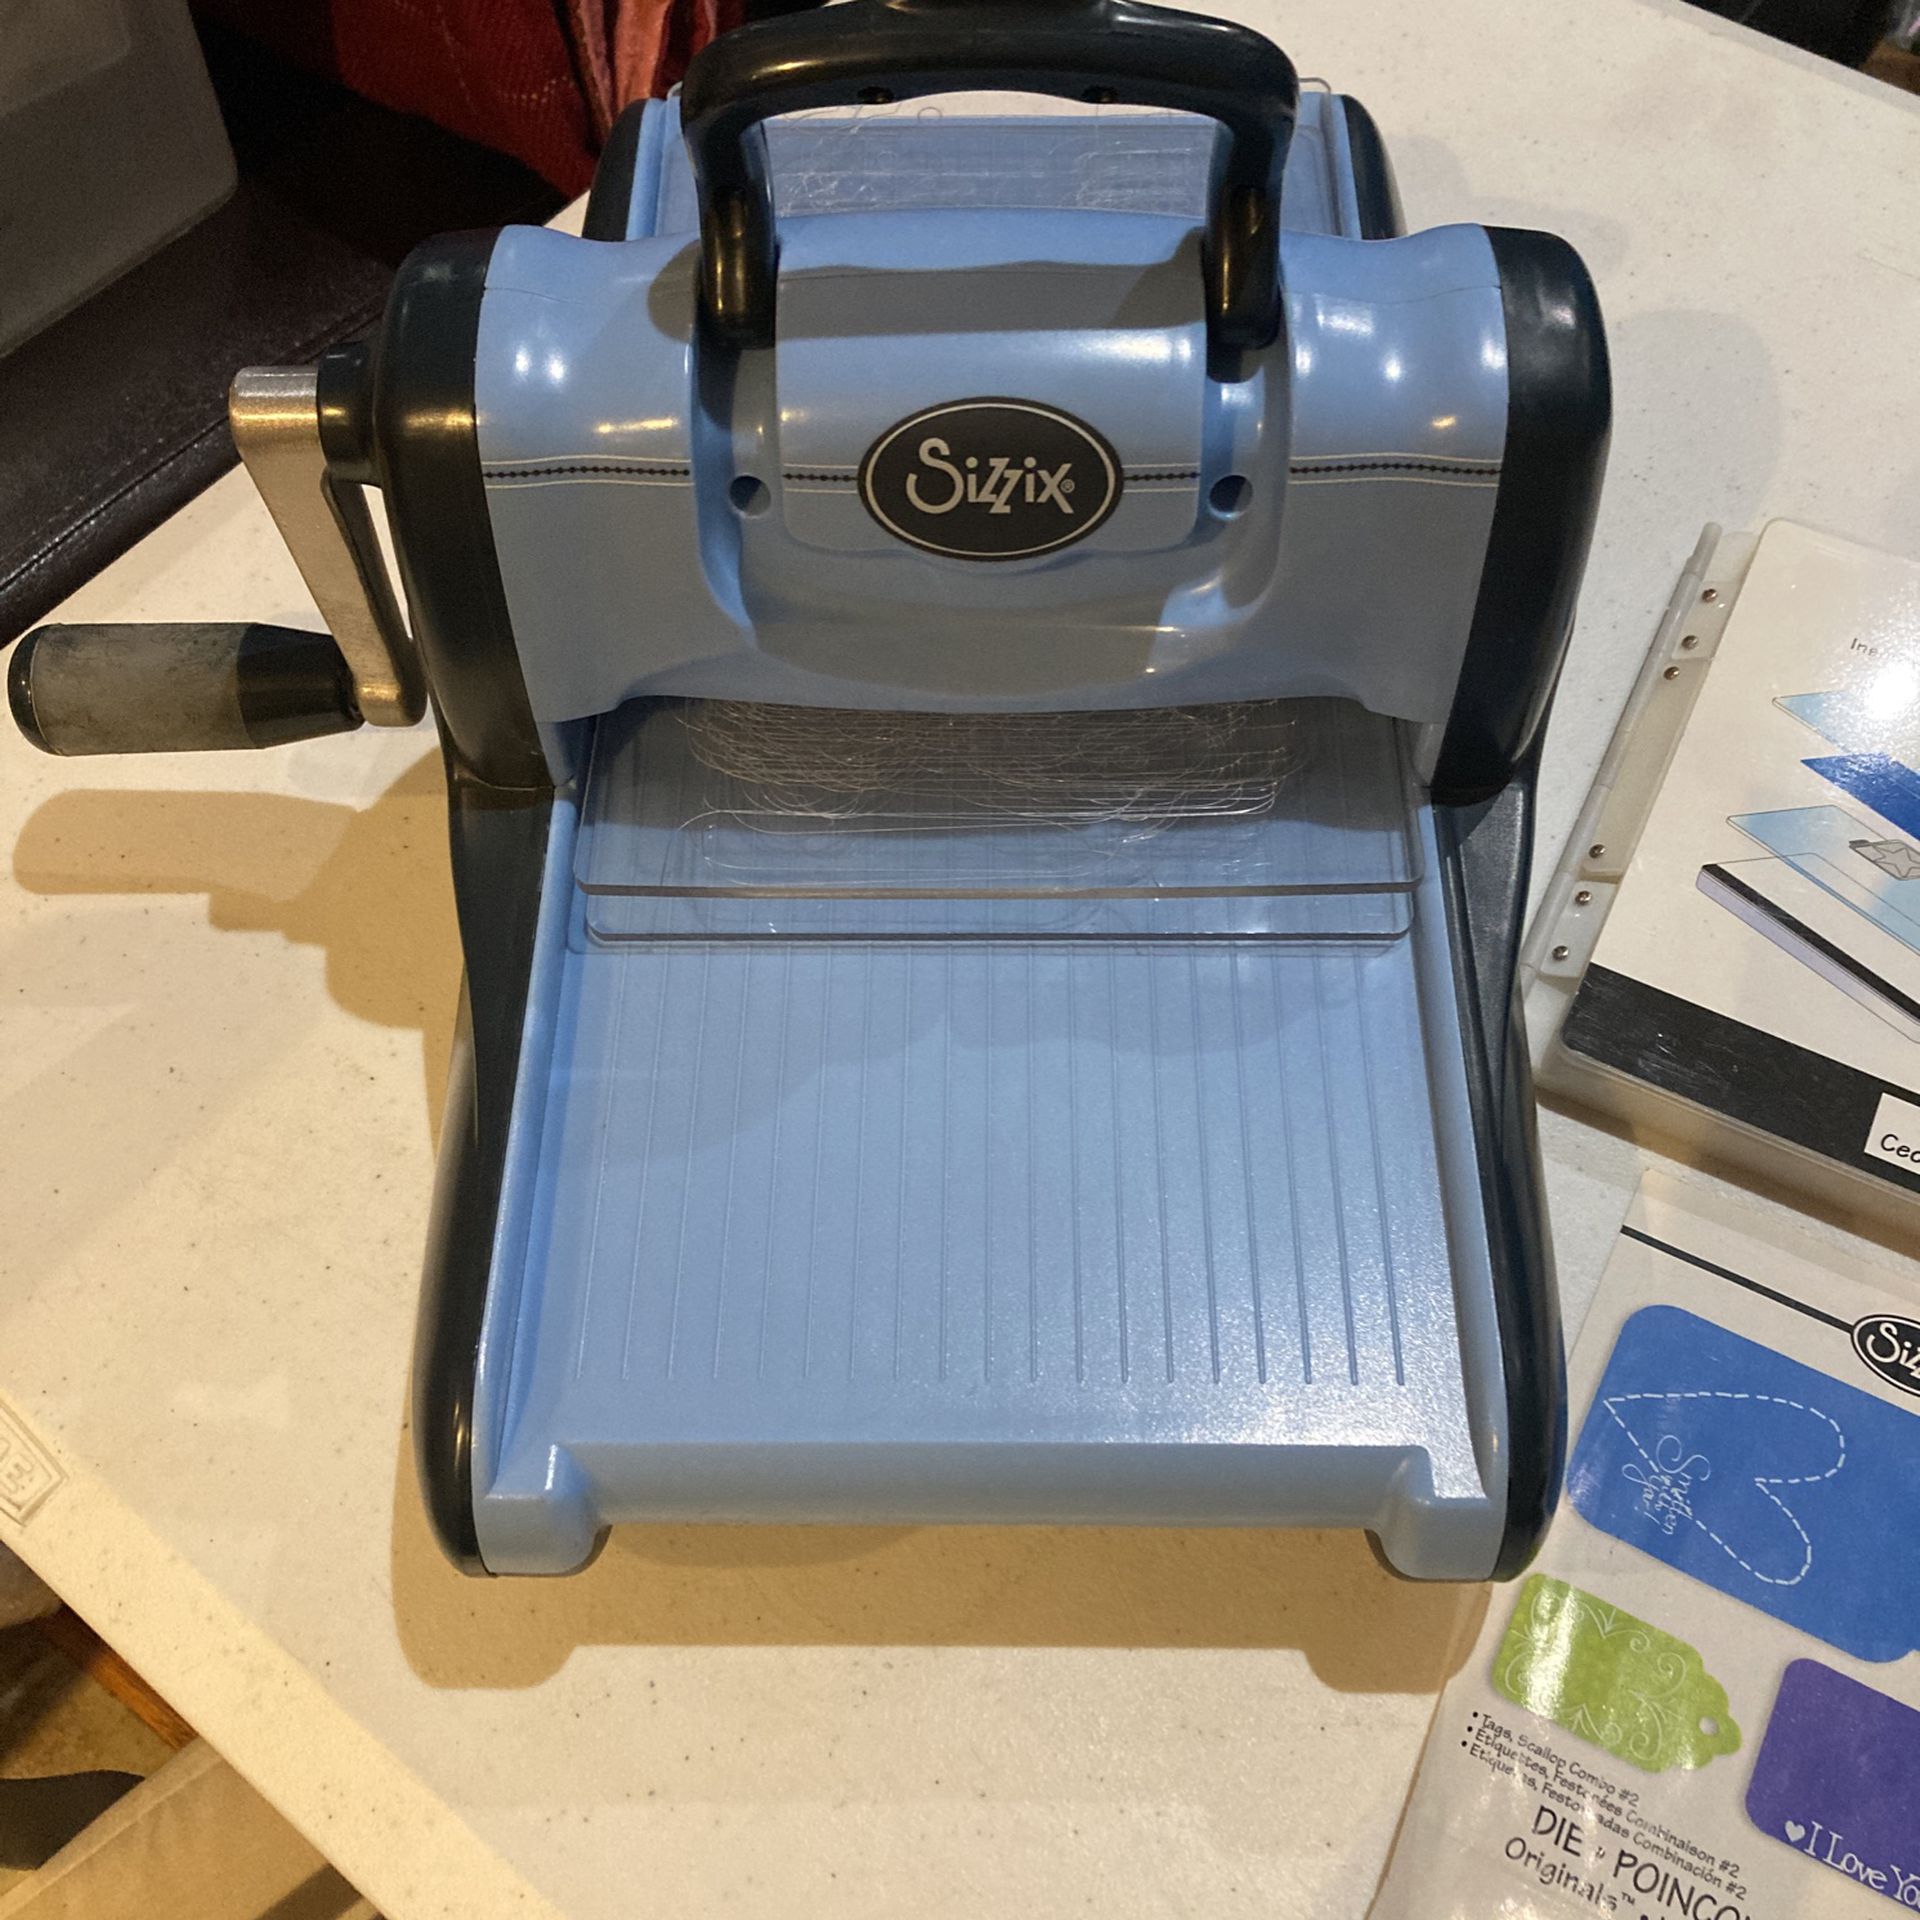 SIZZIX Big Kick Roller Machine For Paper Cutting, etching And Embossing